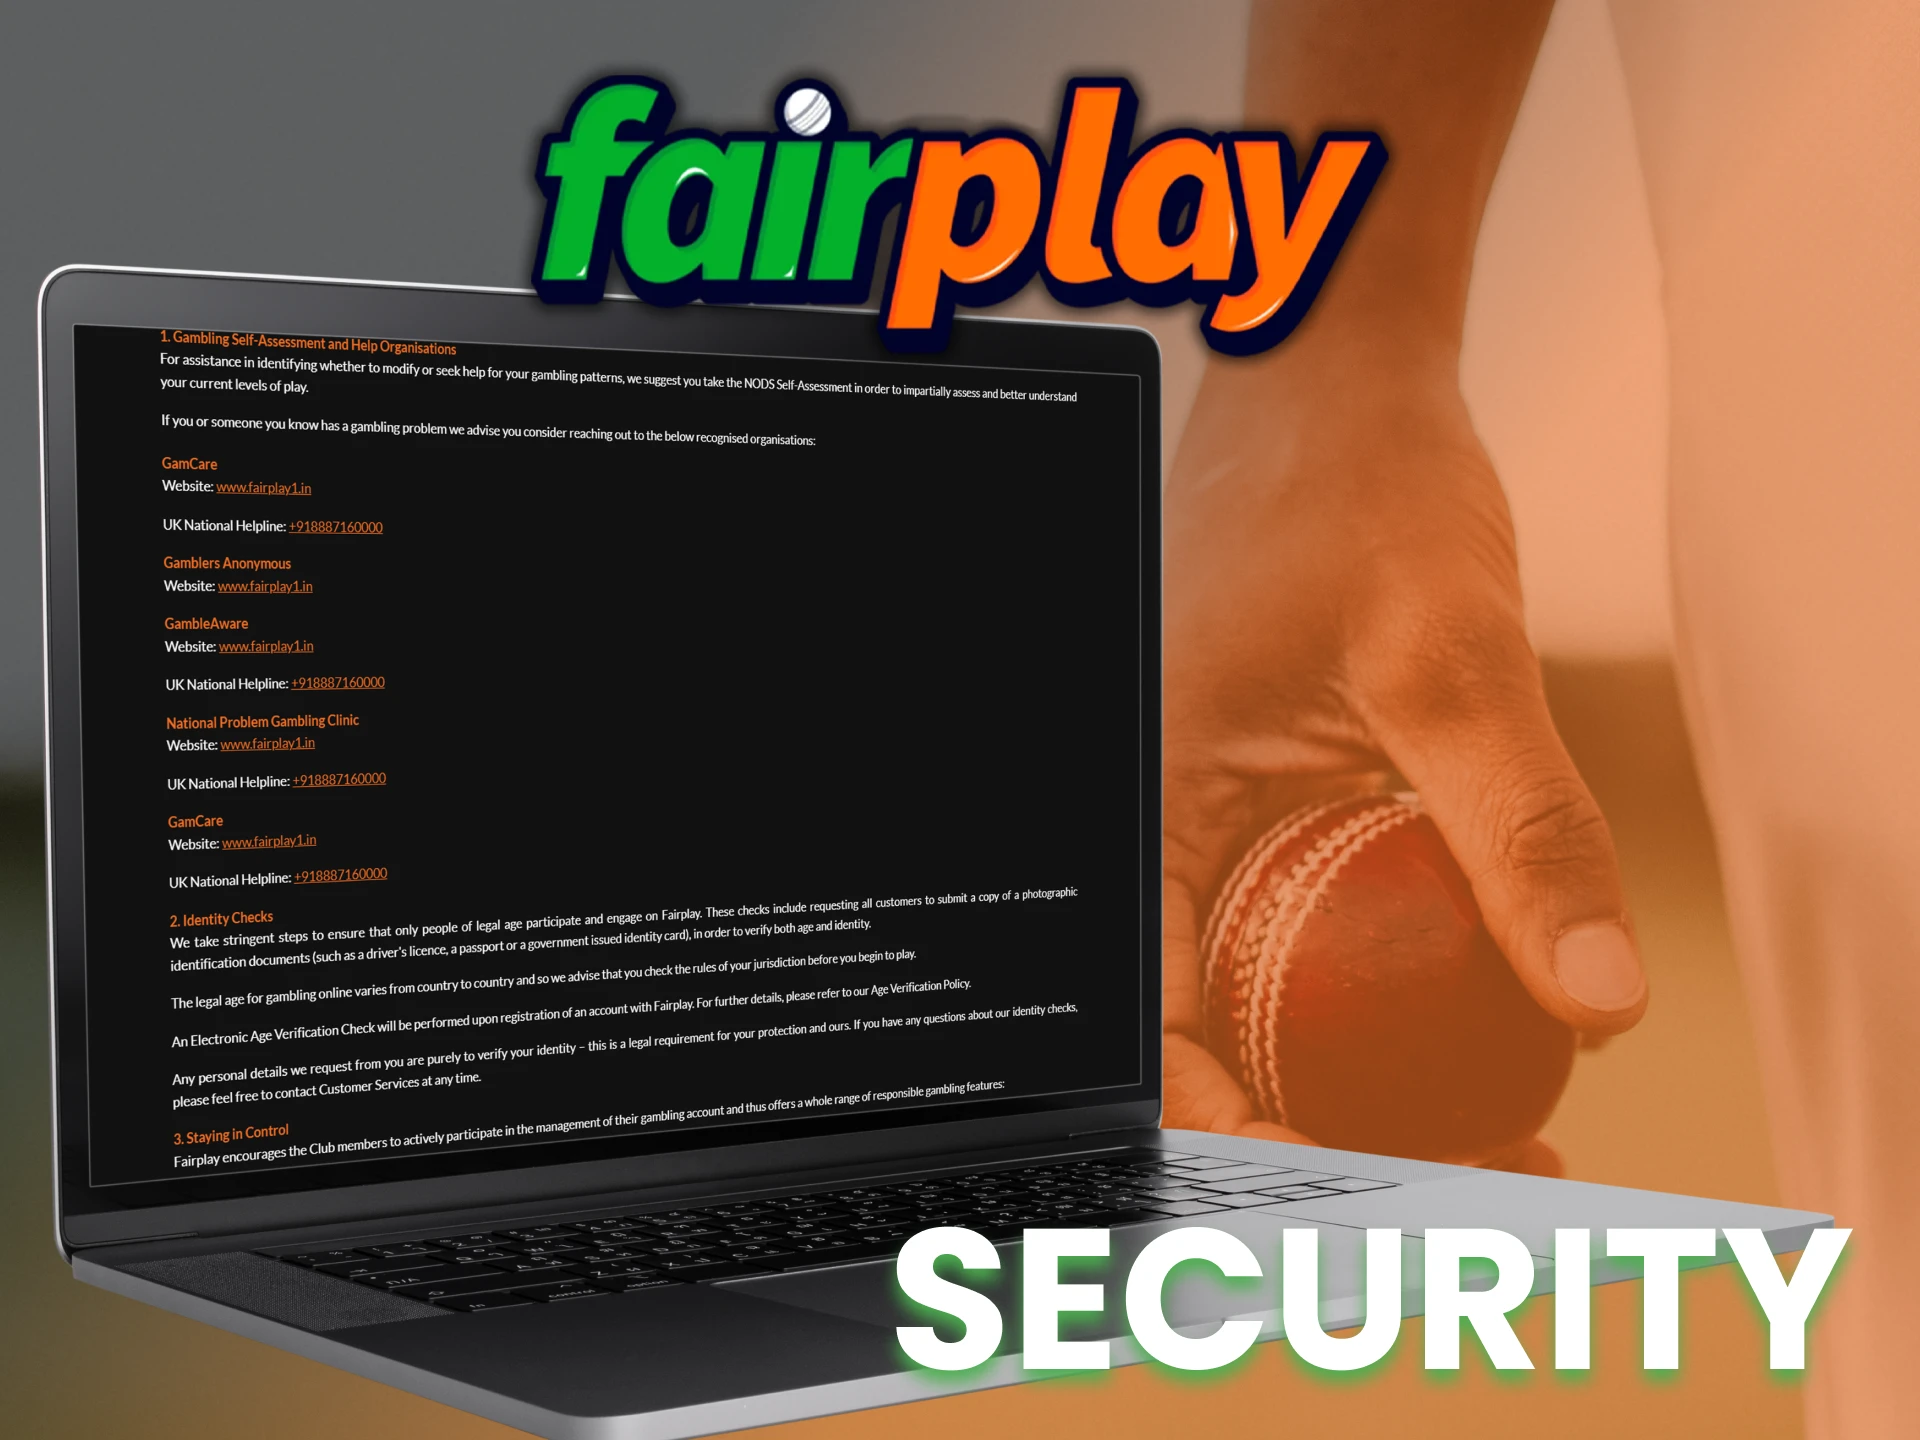 Fairplay secures all private data of the customers.